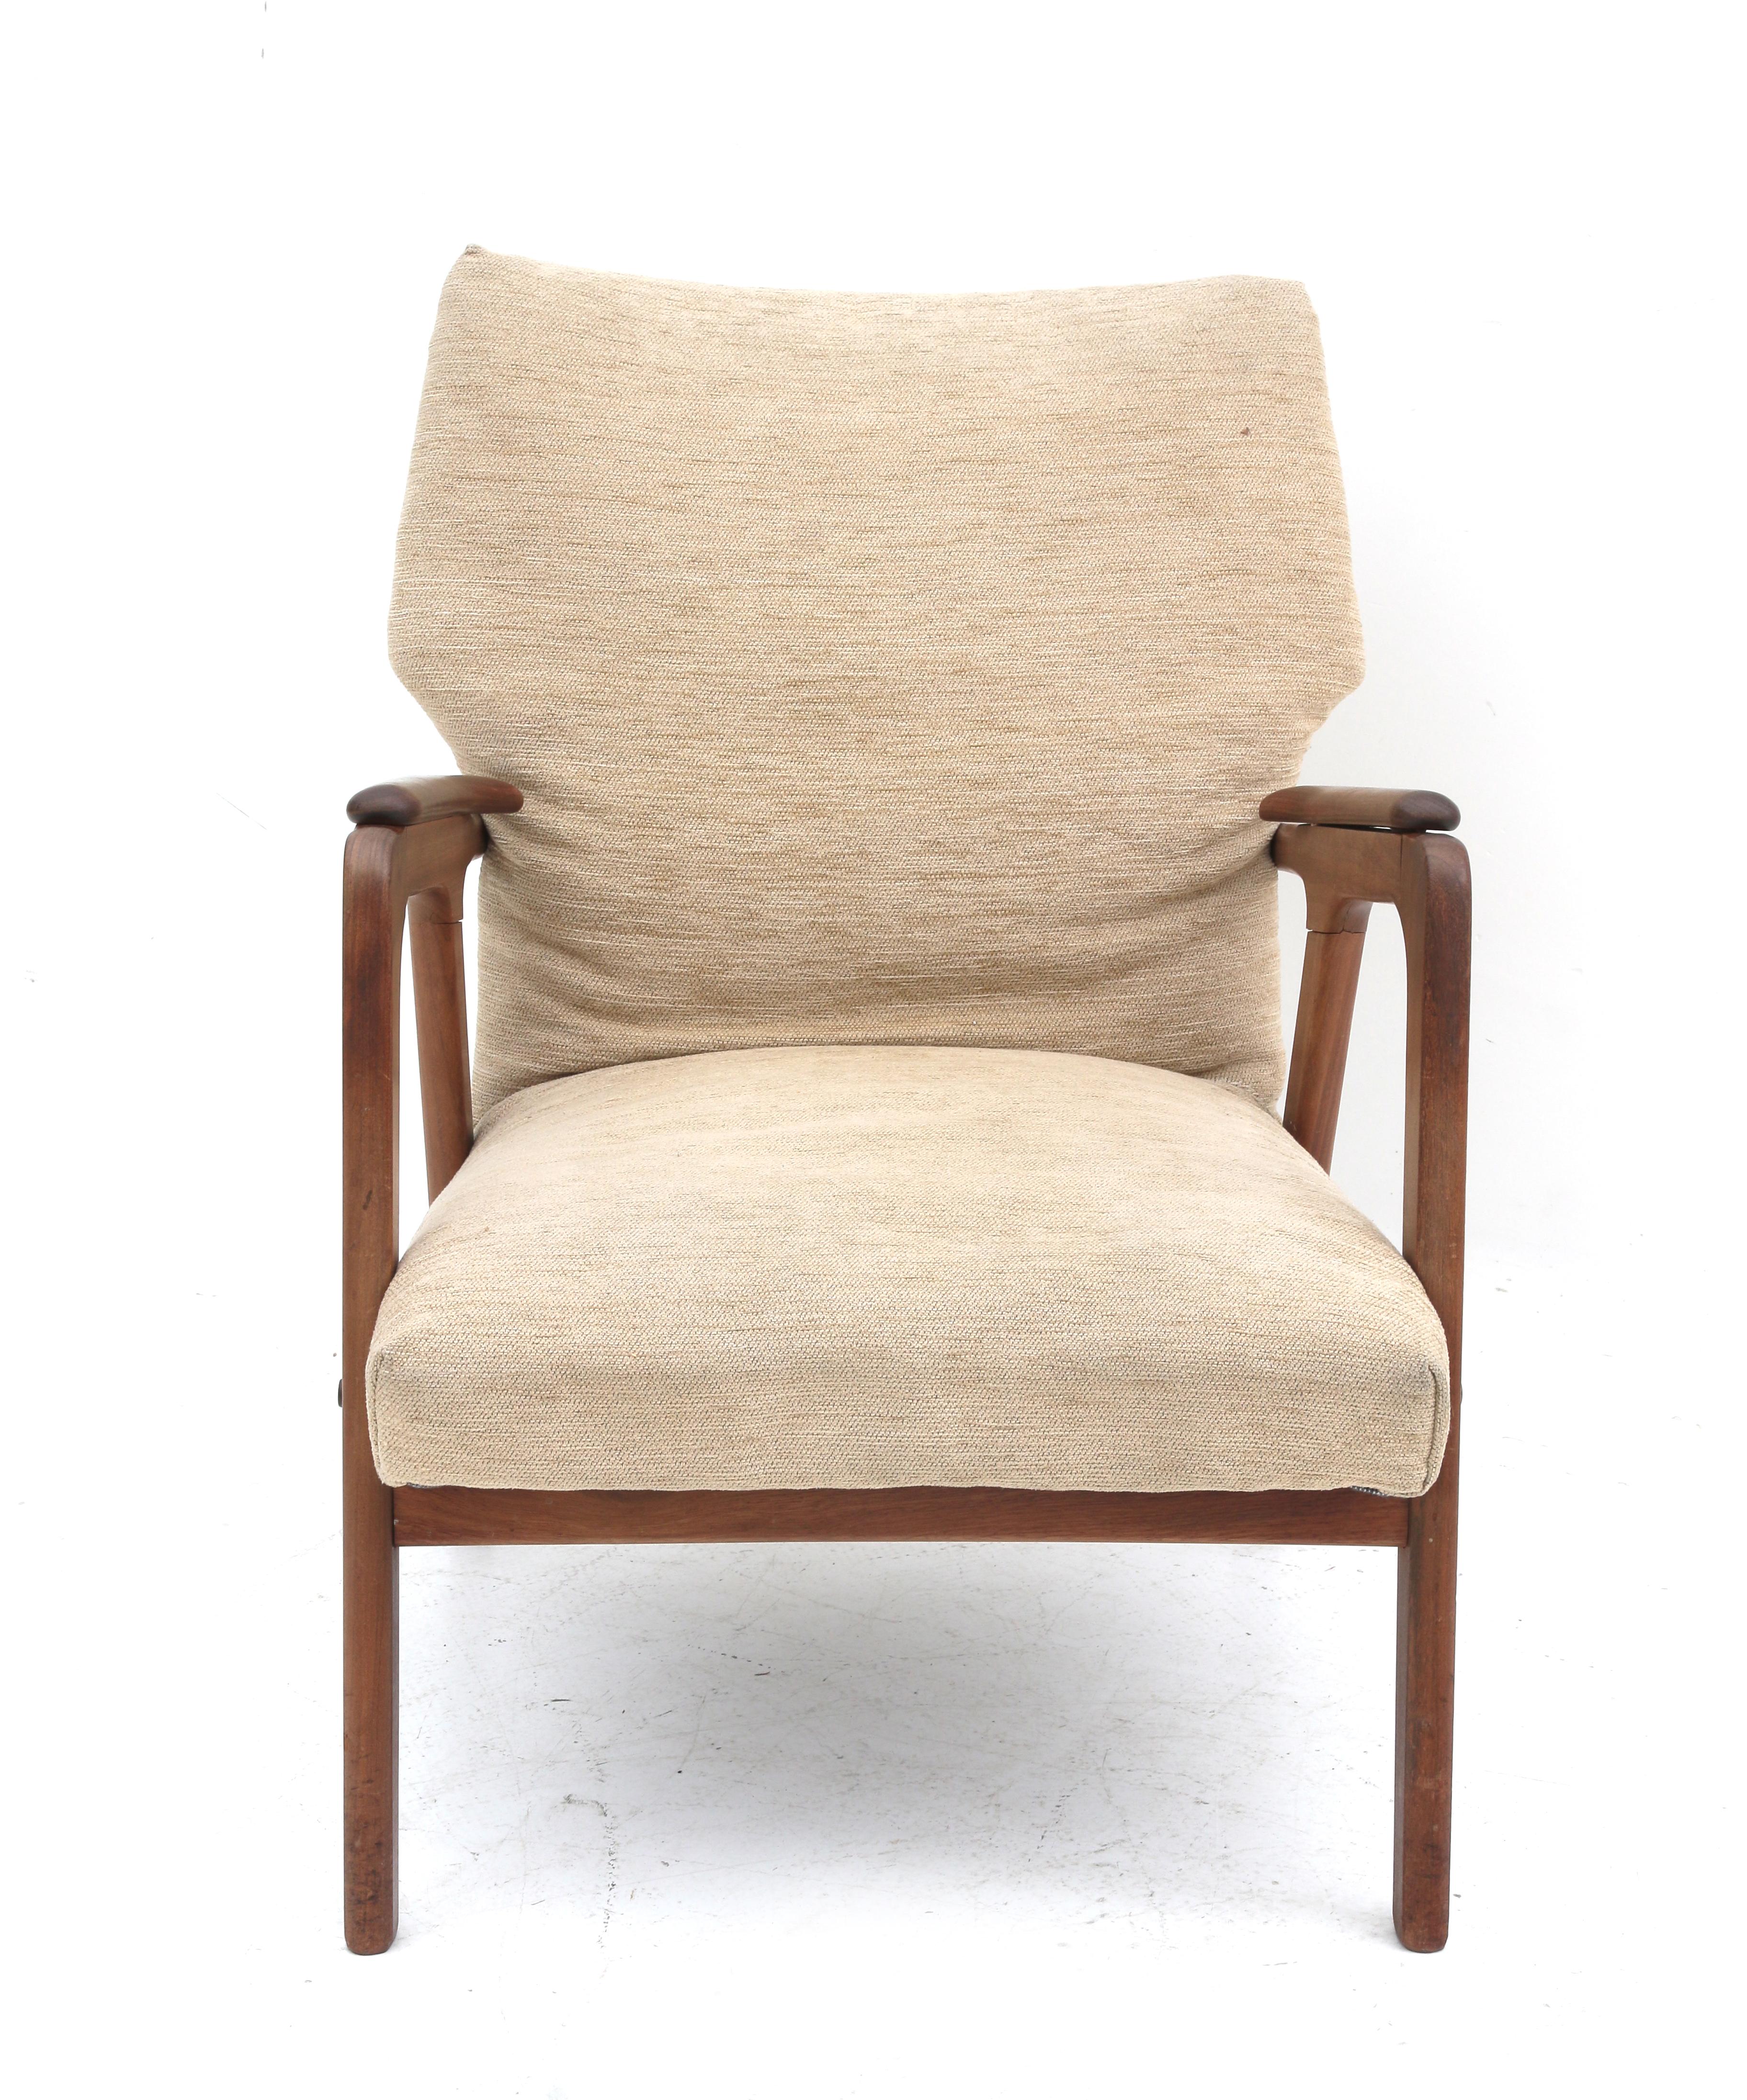 Midcentury Modern A teak easy chair, the seat and backrest with cream fabric upholstery, in the - Image 2 of 3